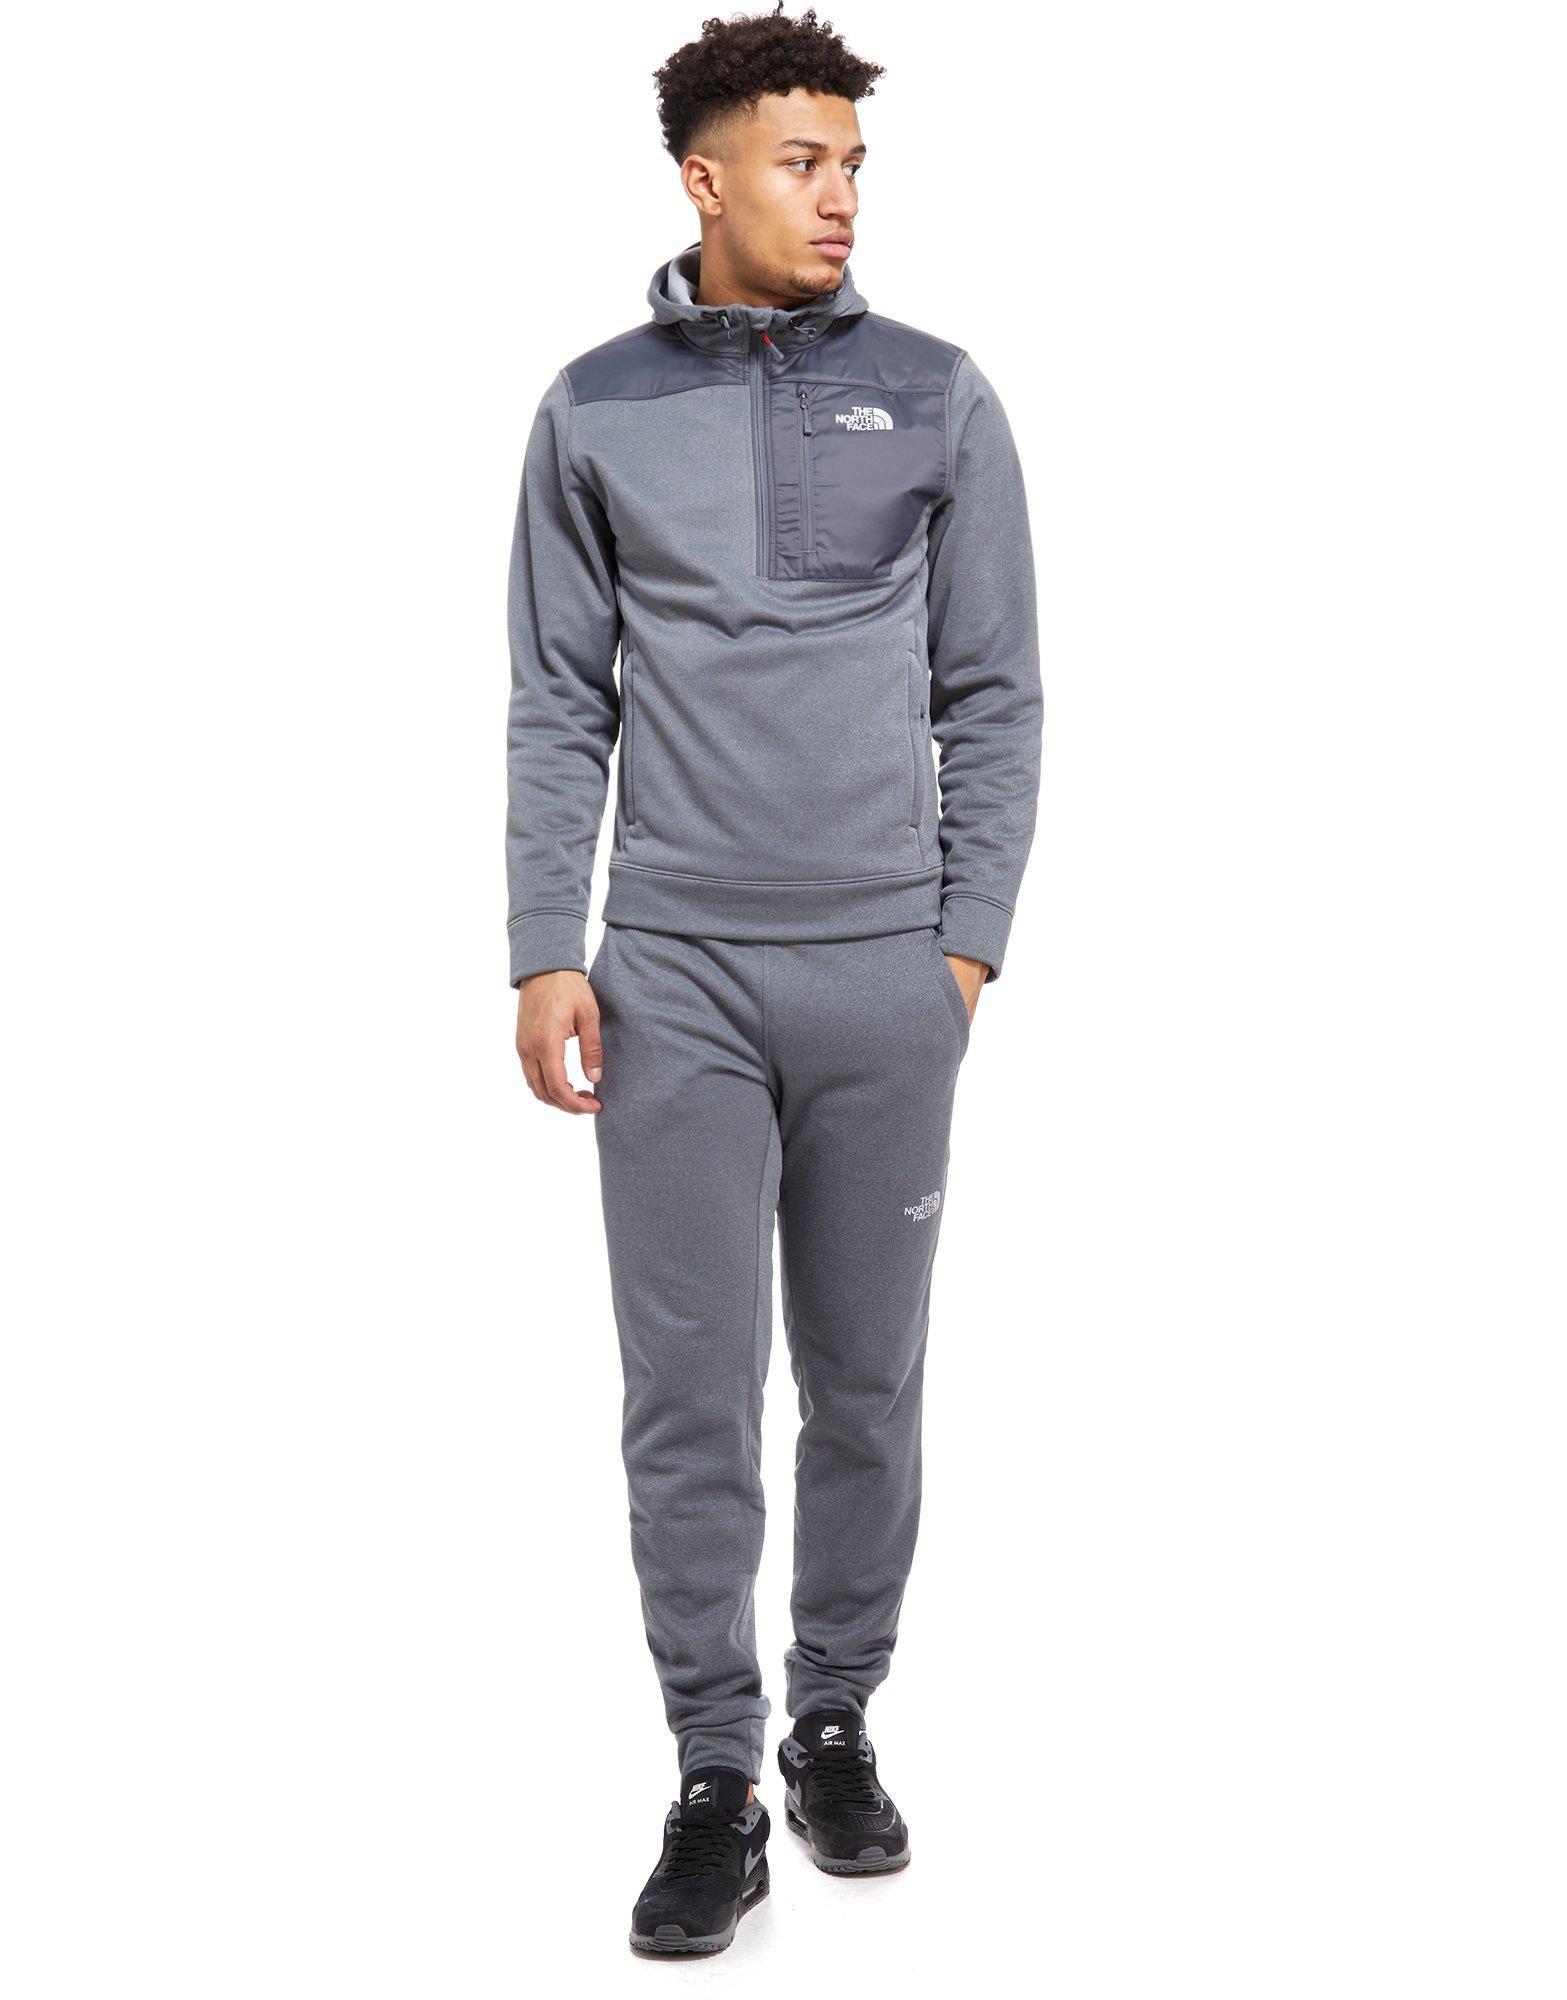 womens grey north face tracksuit